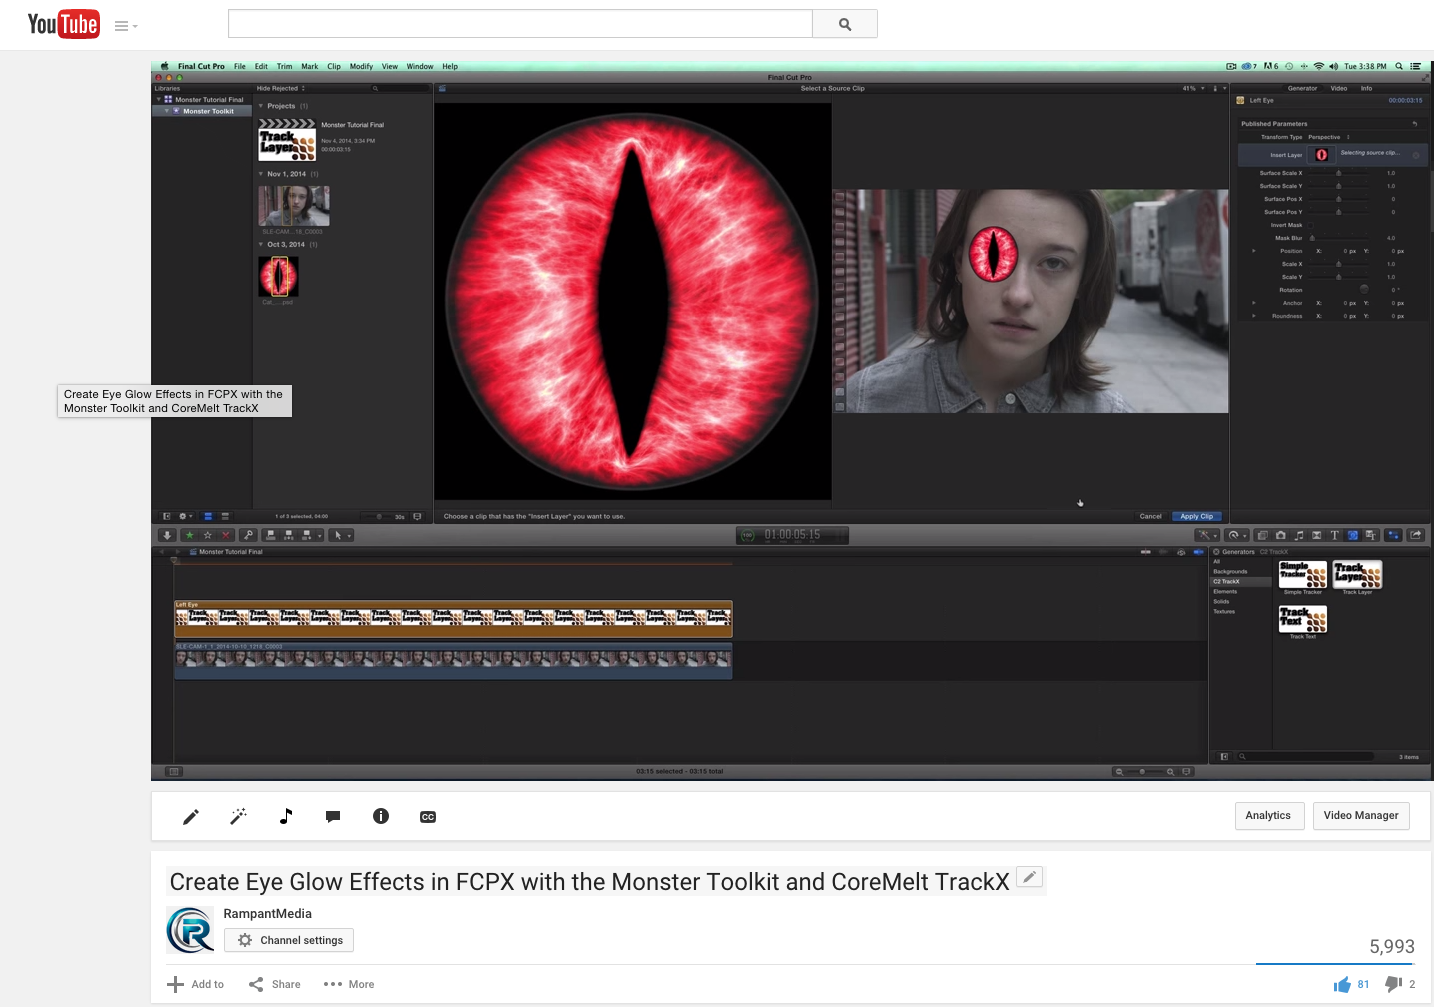 Create Eye Glow Effects in FCPX with the Monster Toolkit and CoreMelt TrackX